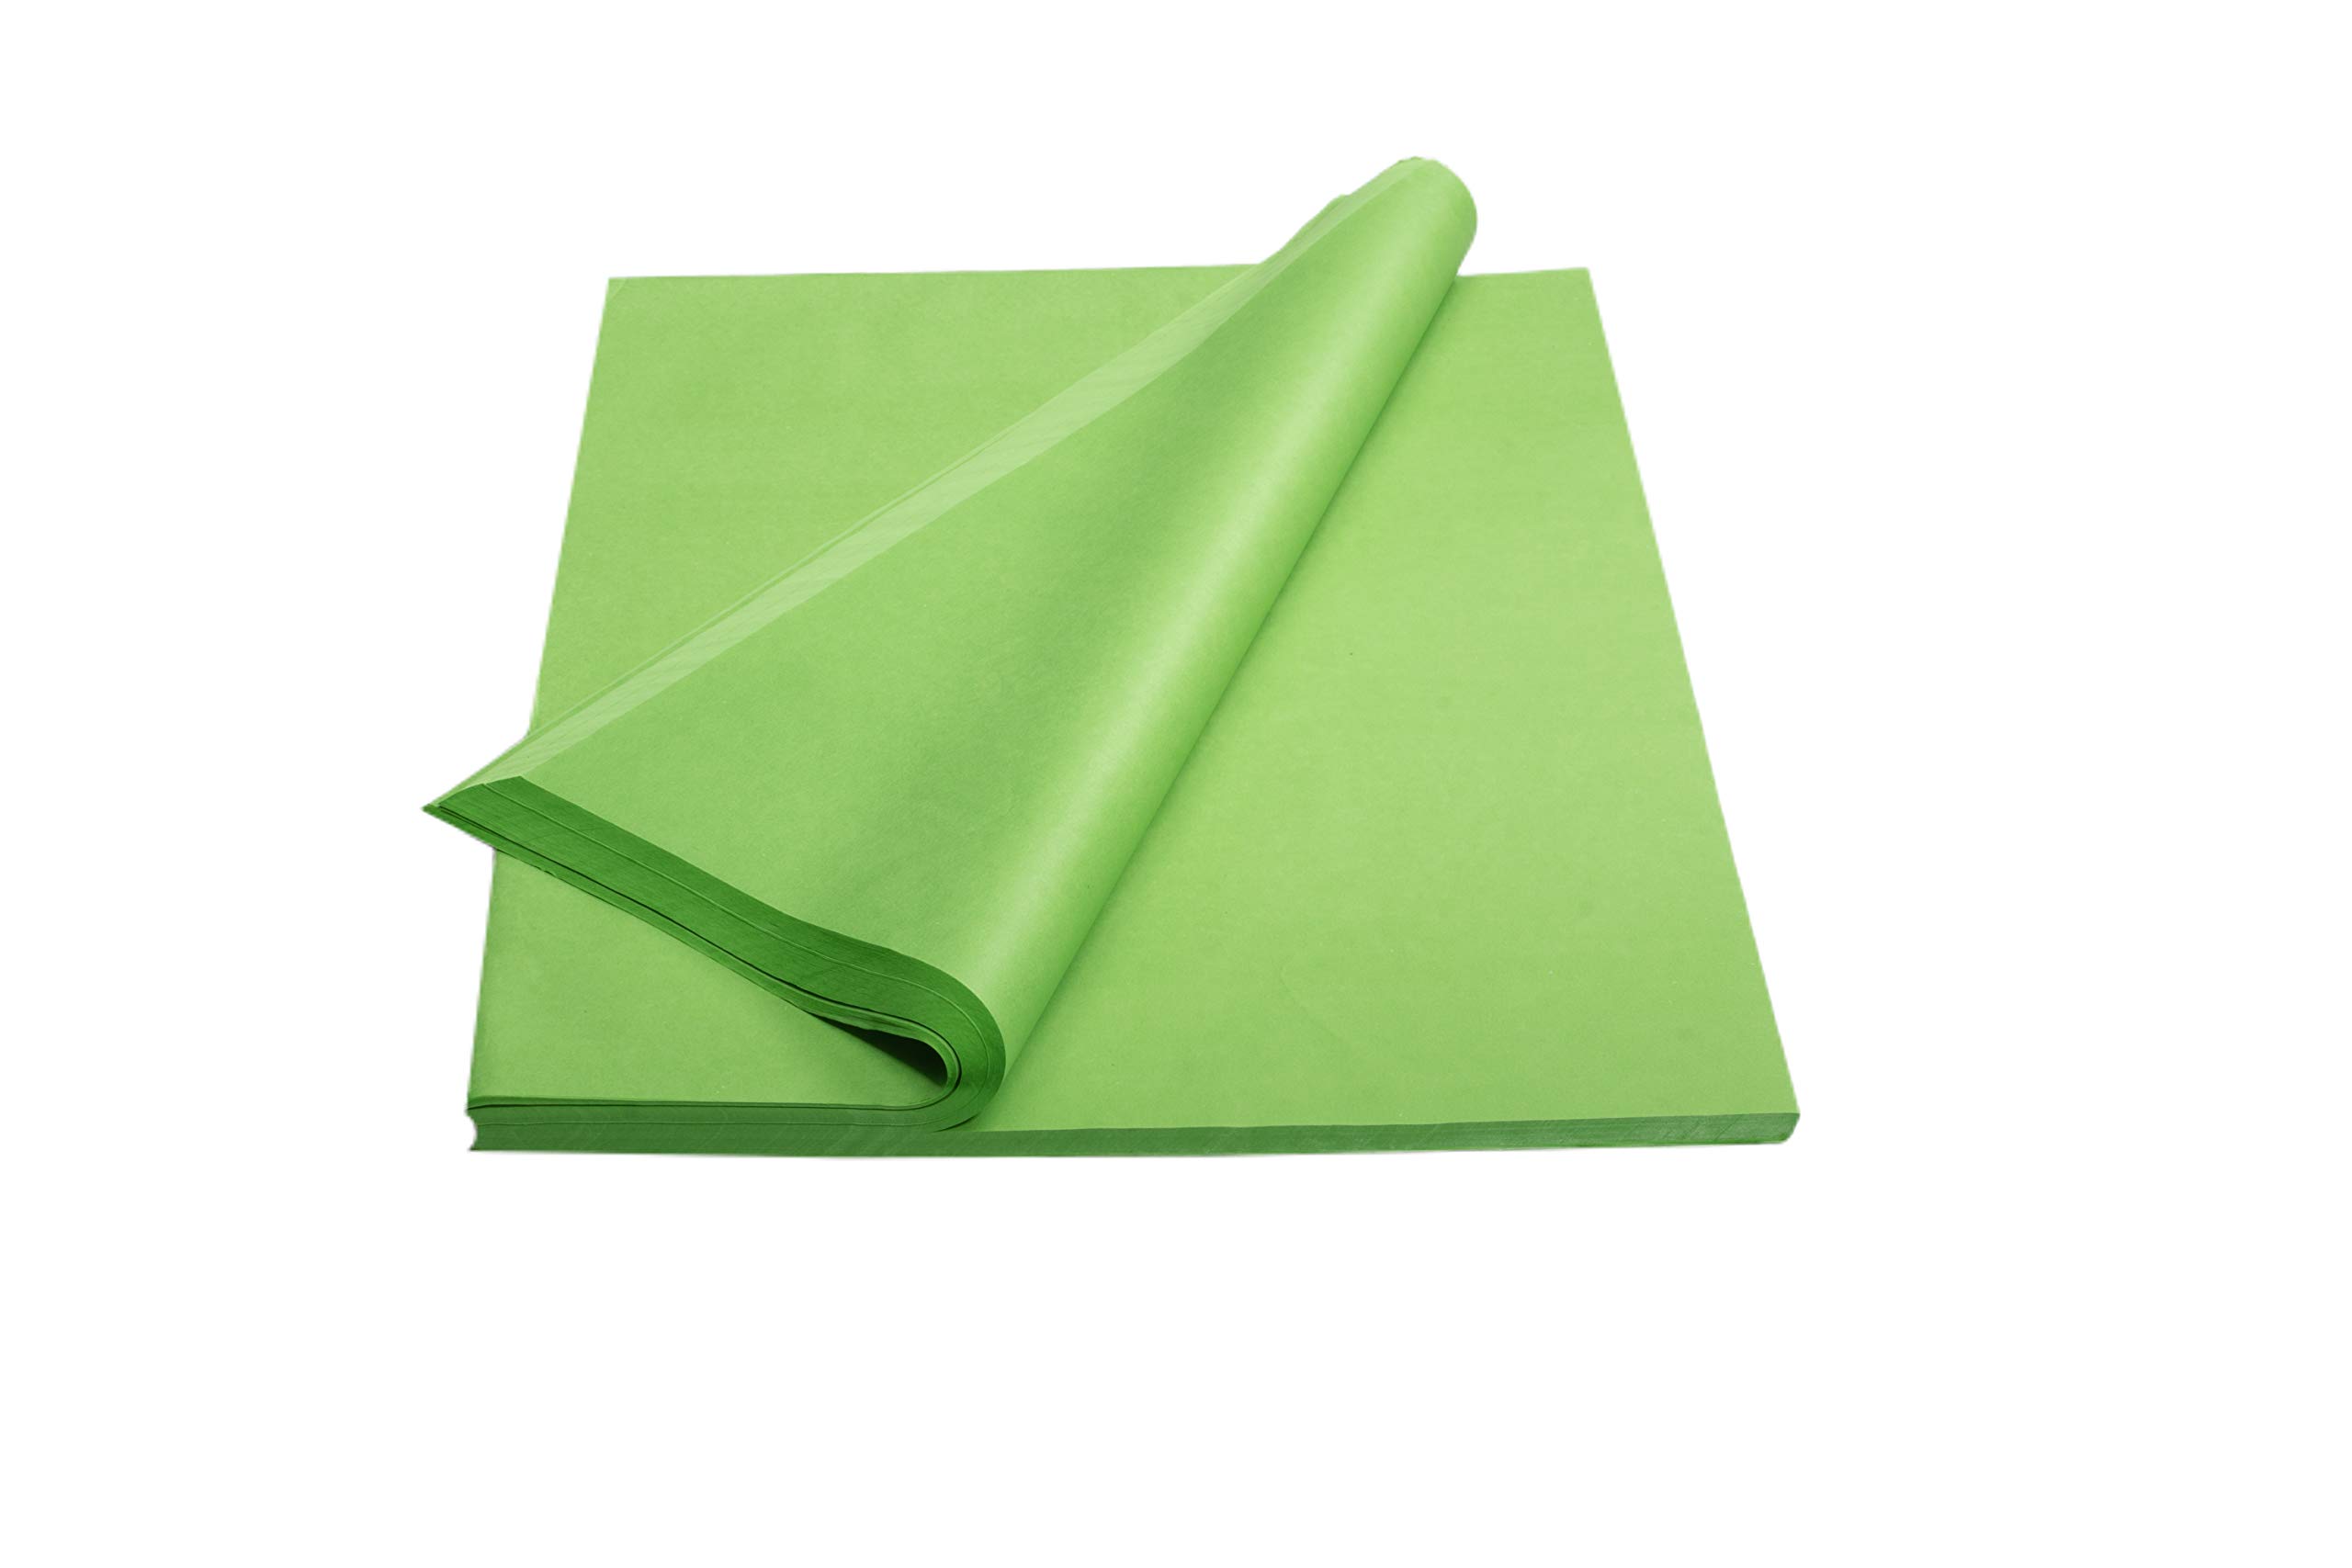 Crown 480 Sheets Bulk Pack Lime Green Tissue Paper Gift Wrap - Ream of Paper - 20 inch. x 30 inch. Wrapping Tissue Paper - for Scrapbooking Paper, ...